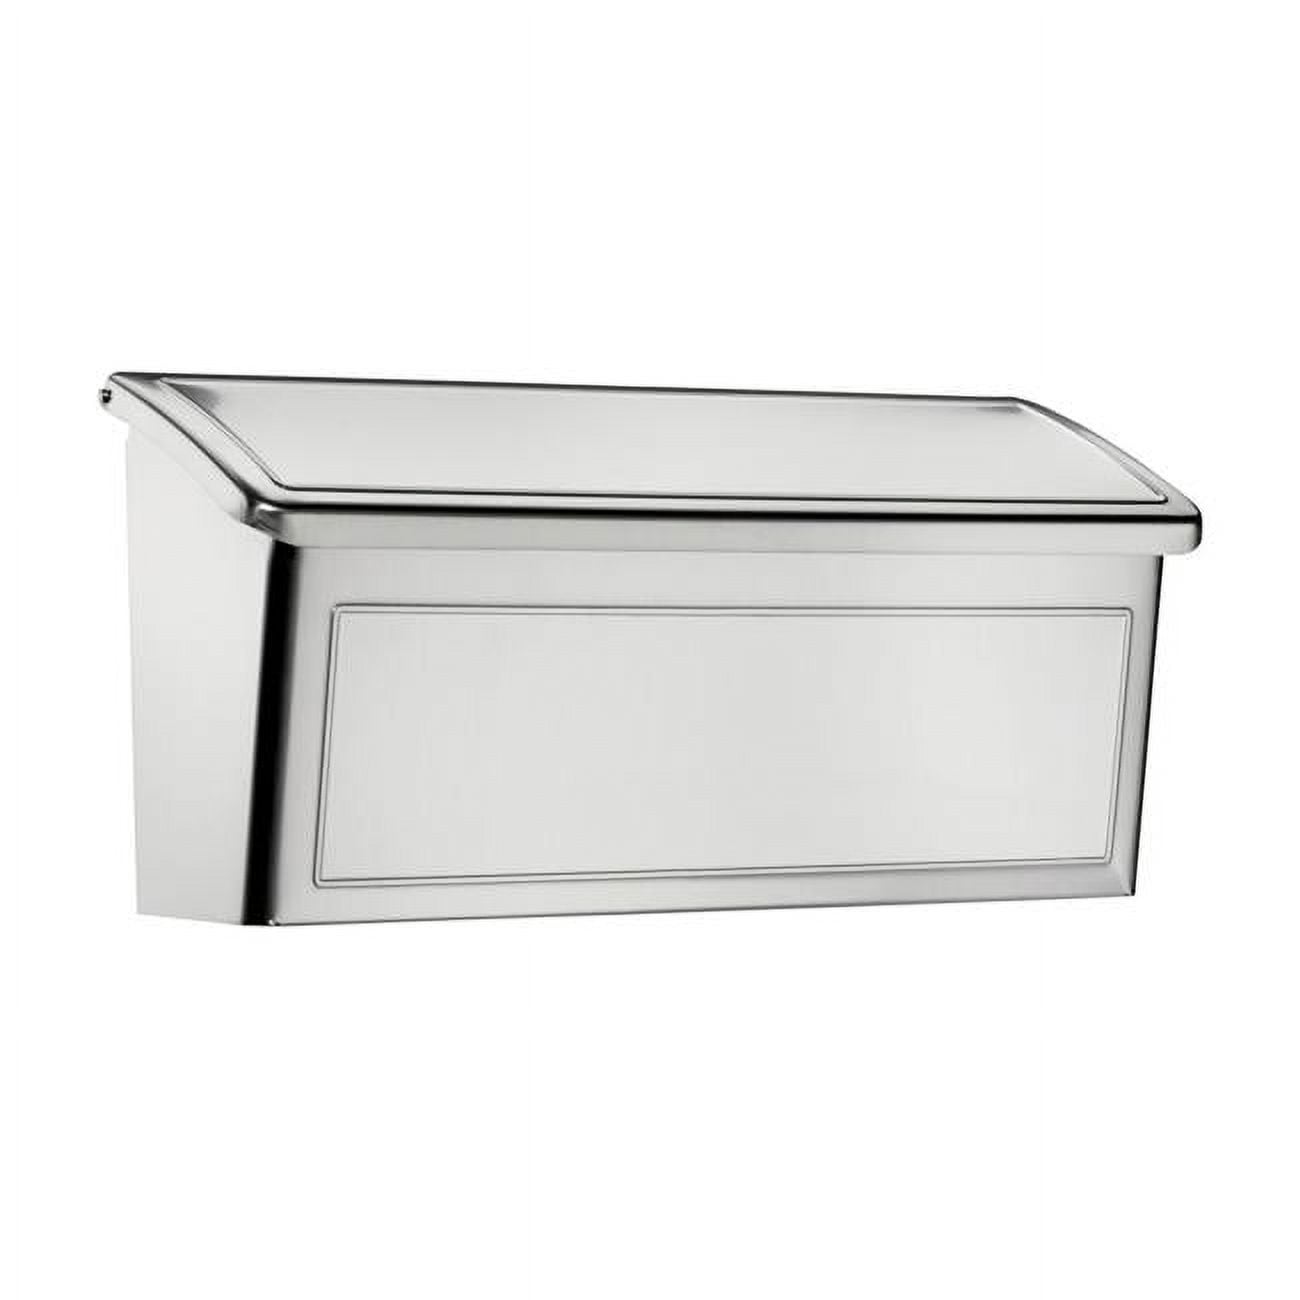 5006269 Venice Stainless Steel Wall-mounted Silver Mailbox, 7.13 X 14.65 X 4.13 In.